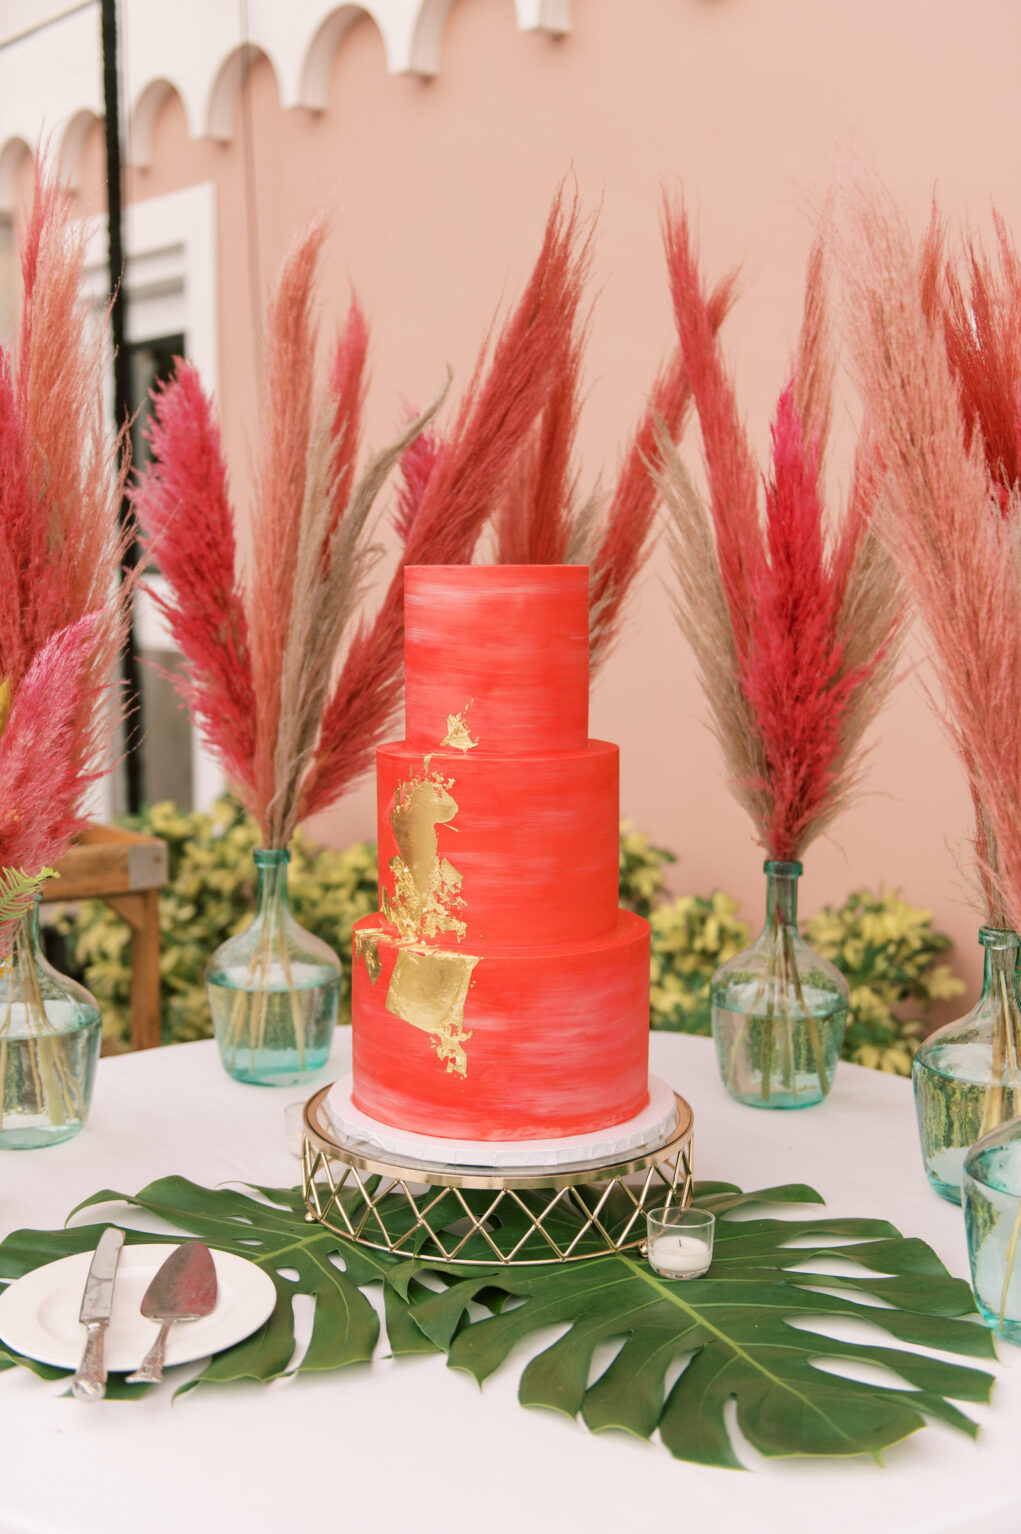 Three Tier Red and Gold Foil Wedding Cake, Monstera Leaves, Red and Hot Pink Pampas Grass in Vases | Tampa Bay Wedding Cake The Artistic Whisk